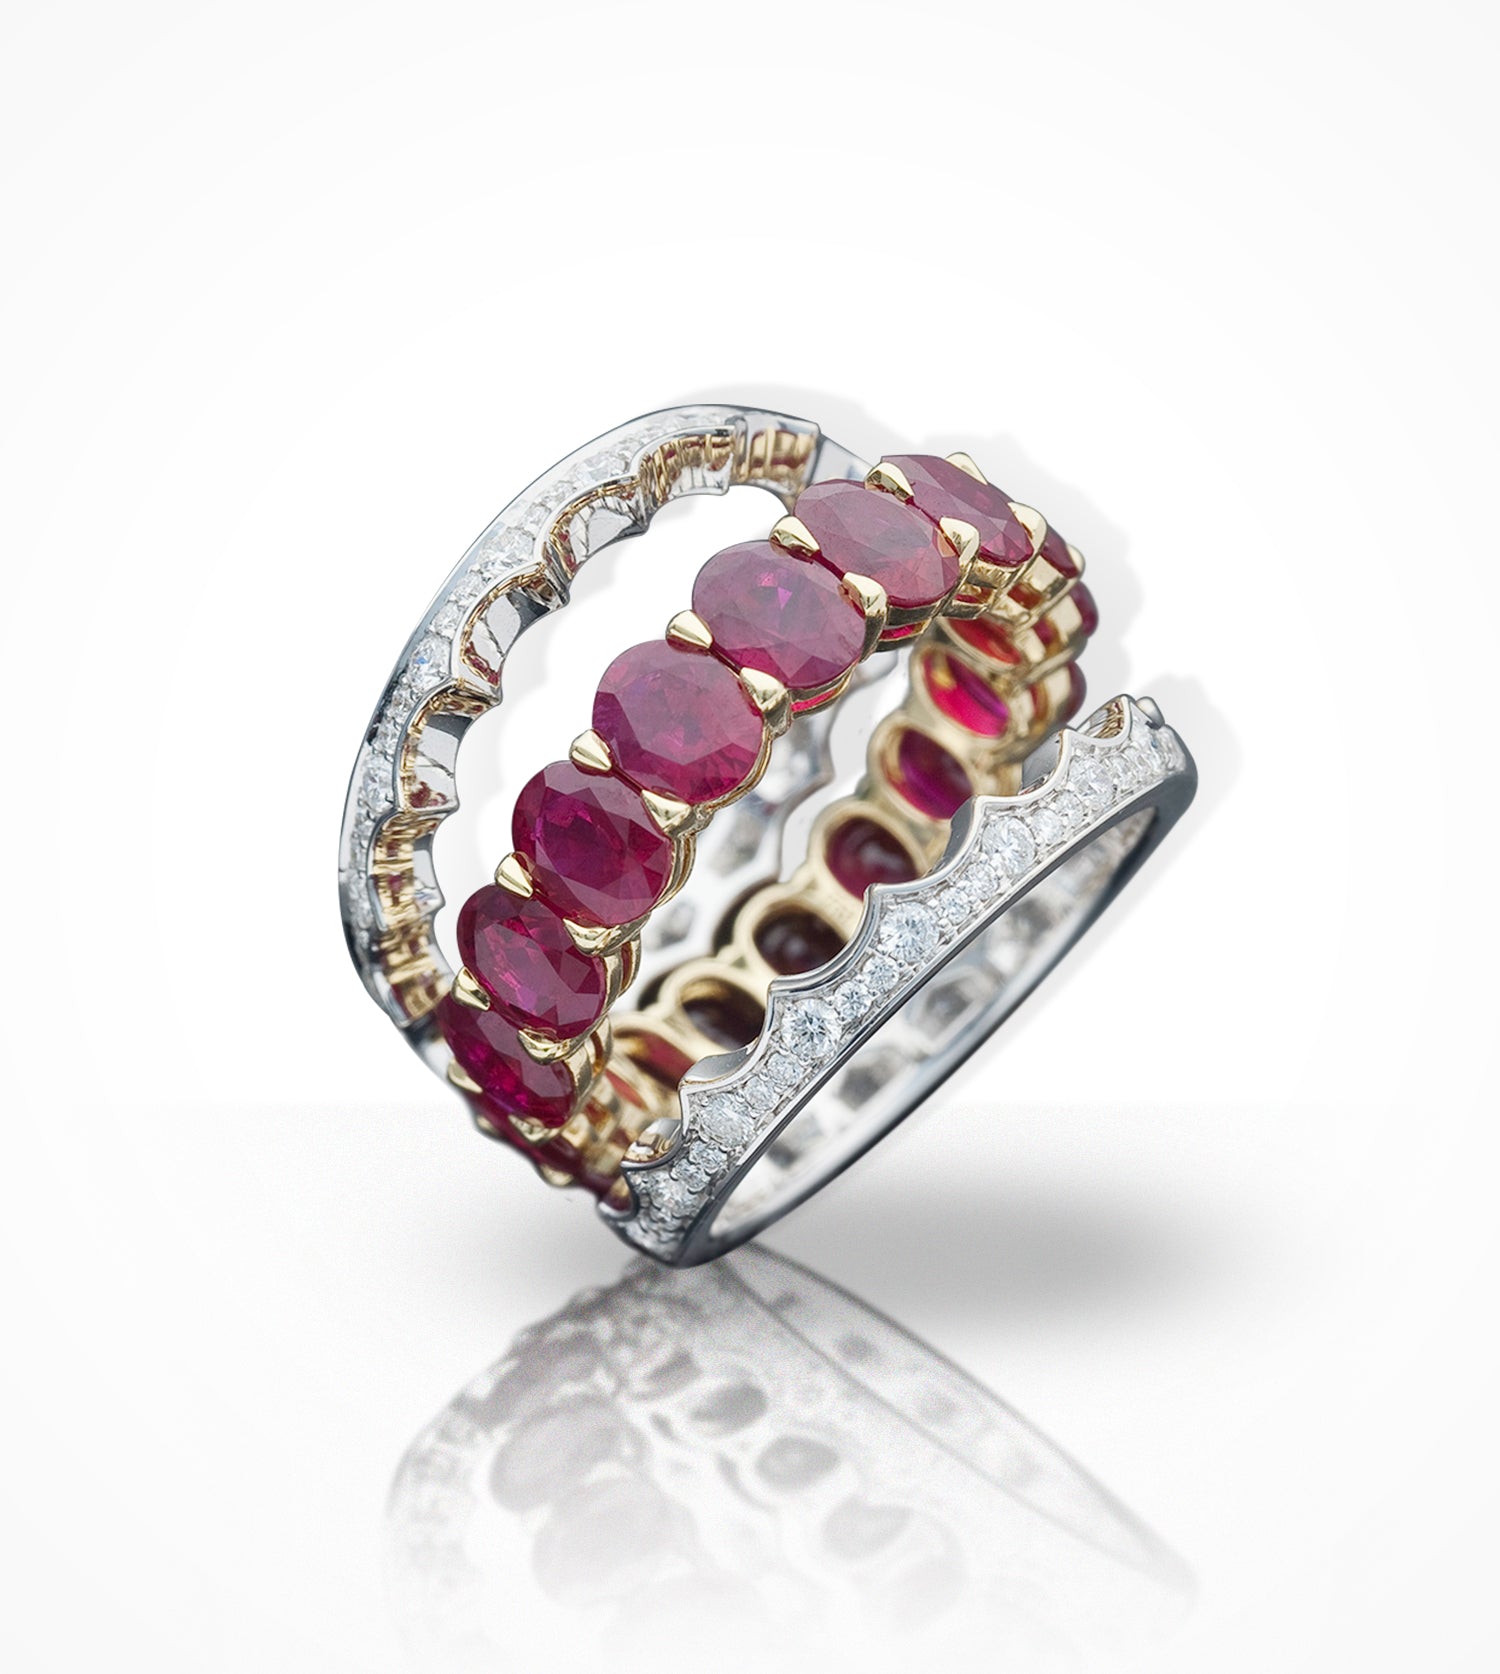 RG00248 18K white gold, 17 ruby eternity band and 2 crown style ring guards